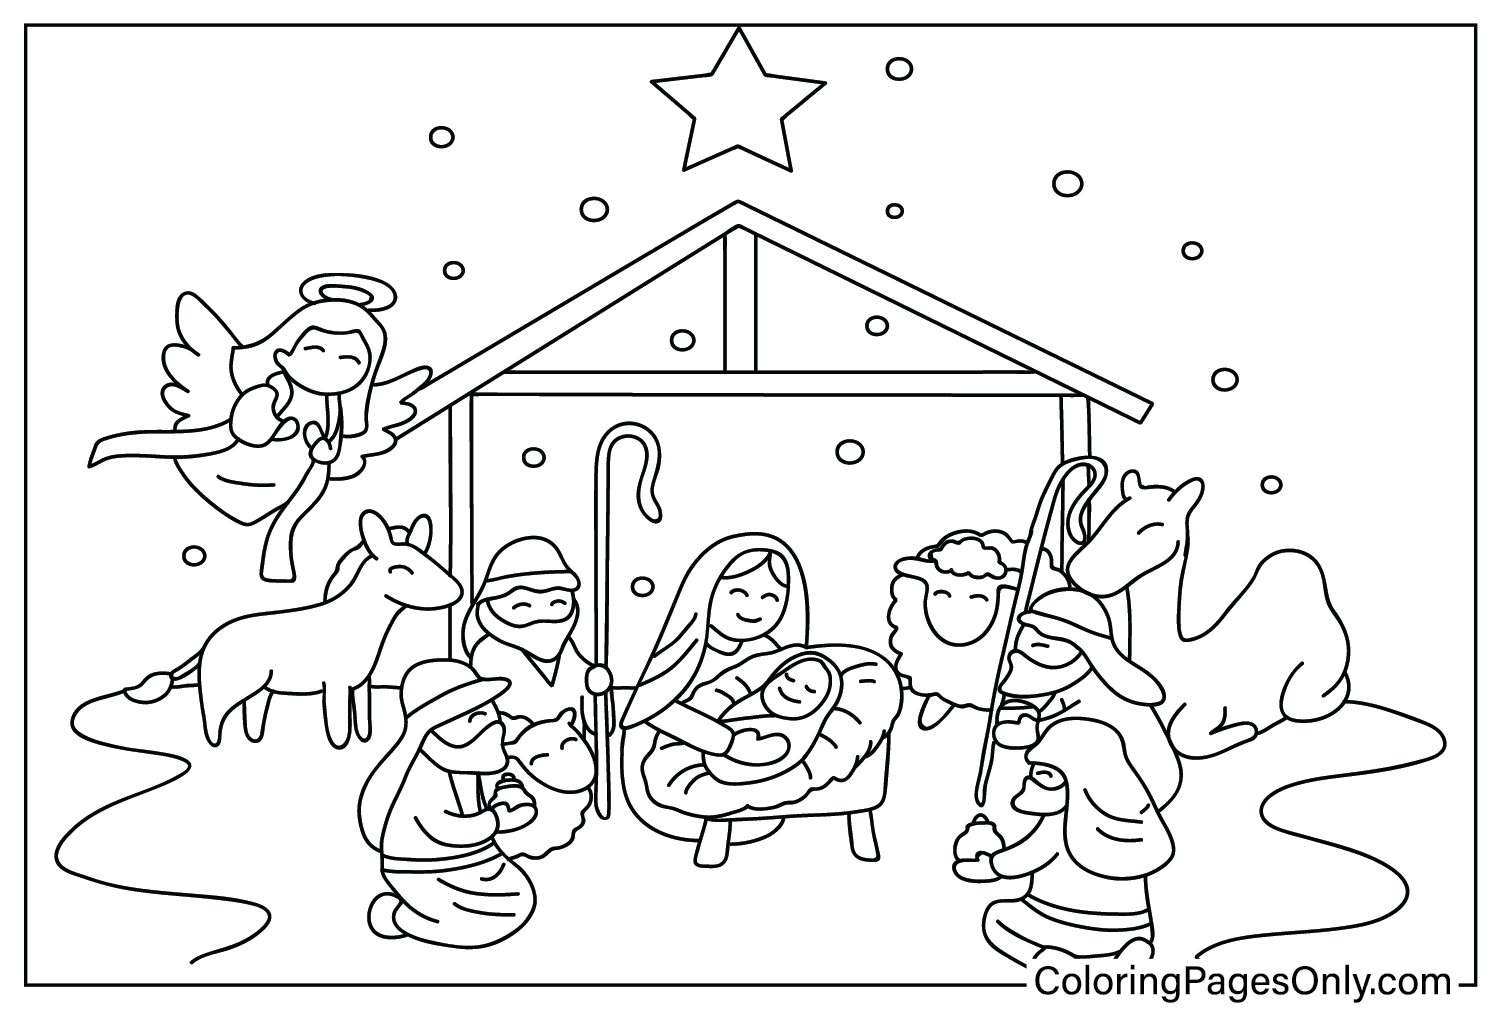 Nativity Scene Coloring Pages from Palestine